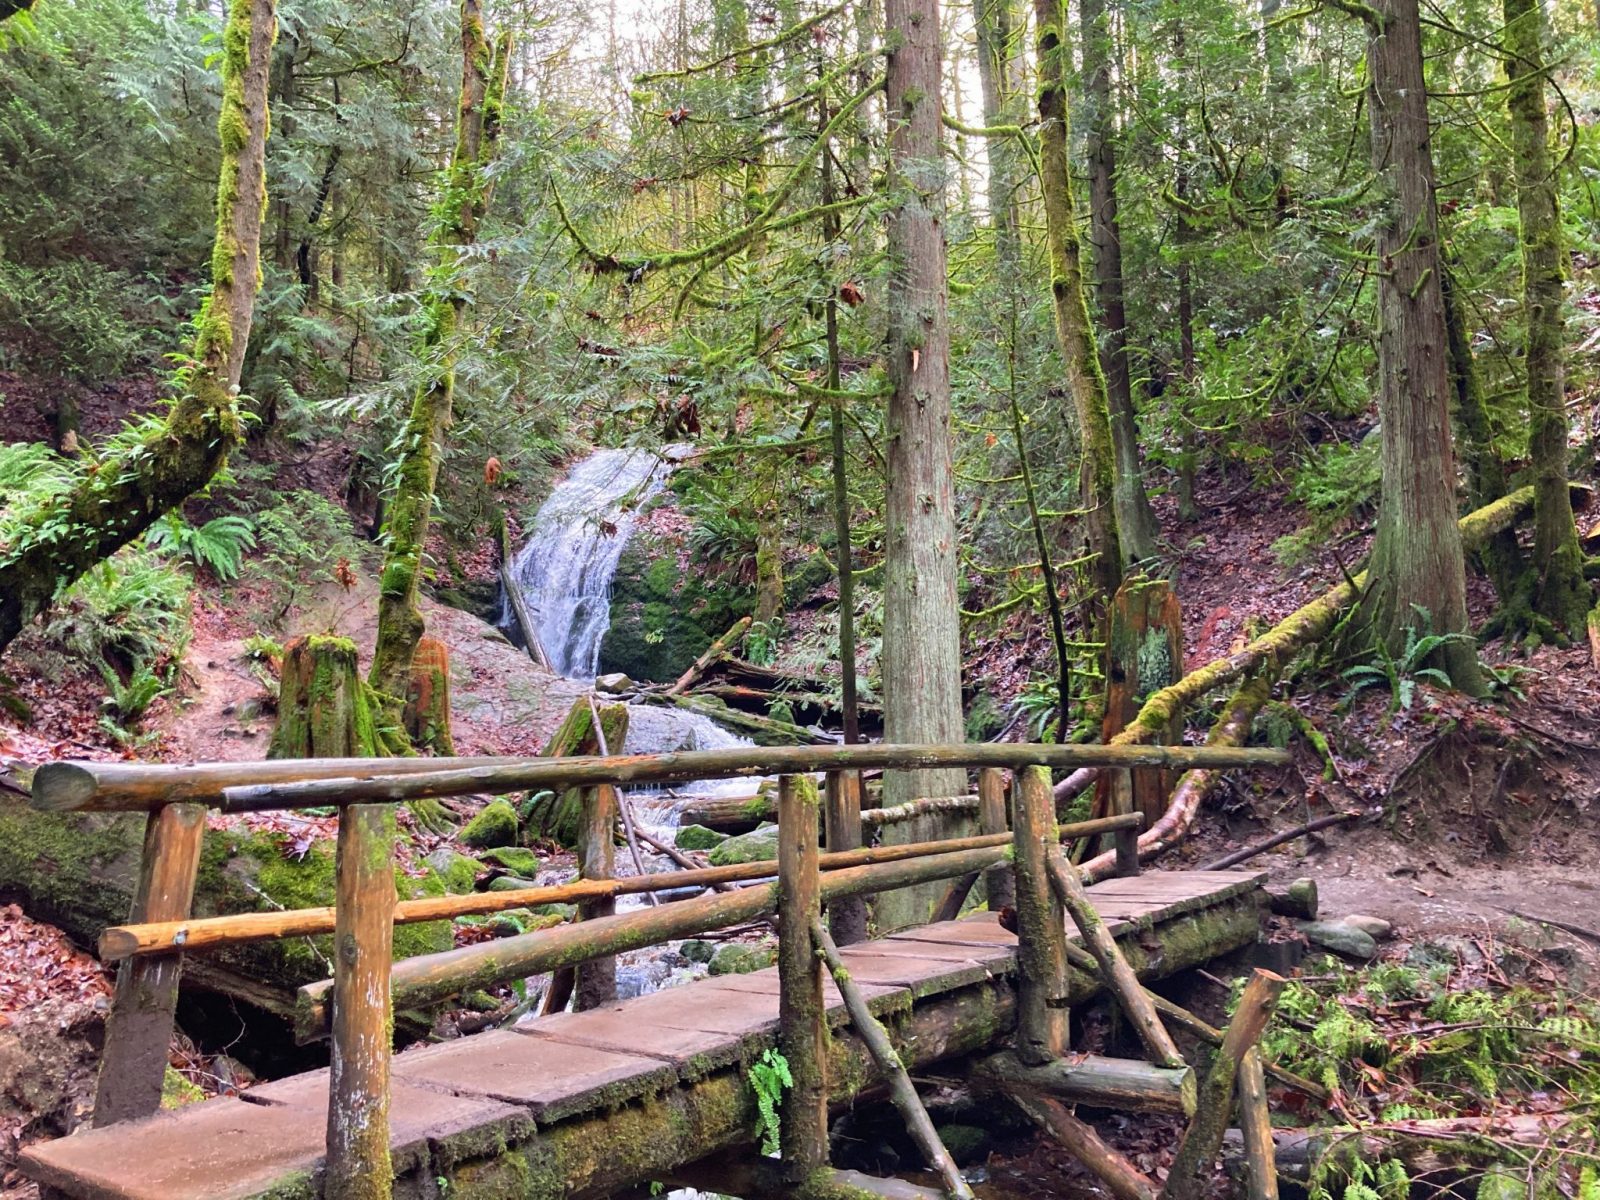 A Coal Creek Falls comes over a mossy rock face in the forest. In the foreground, a log pedestrian bridge crosses the creek below the waterfall